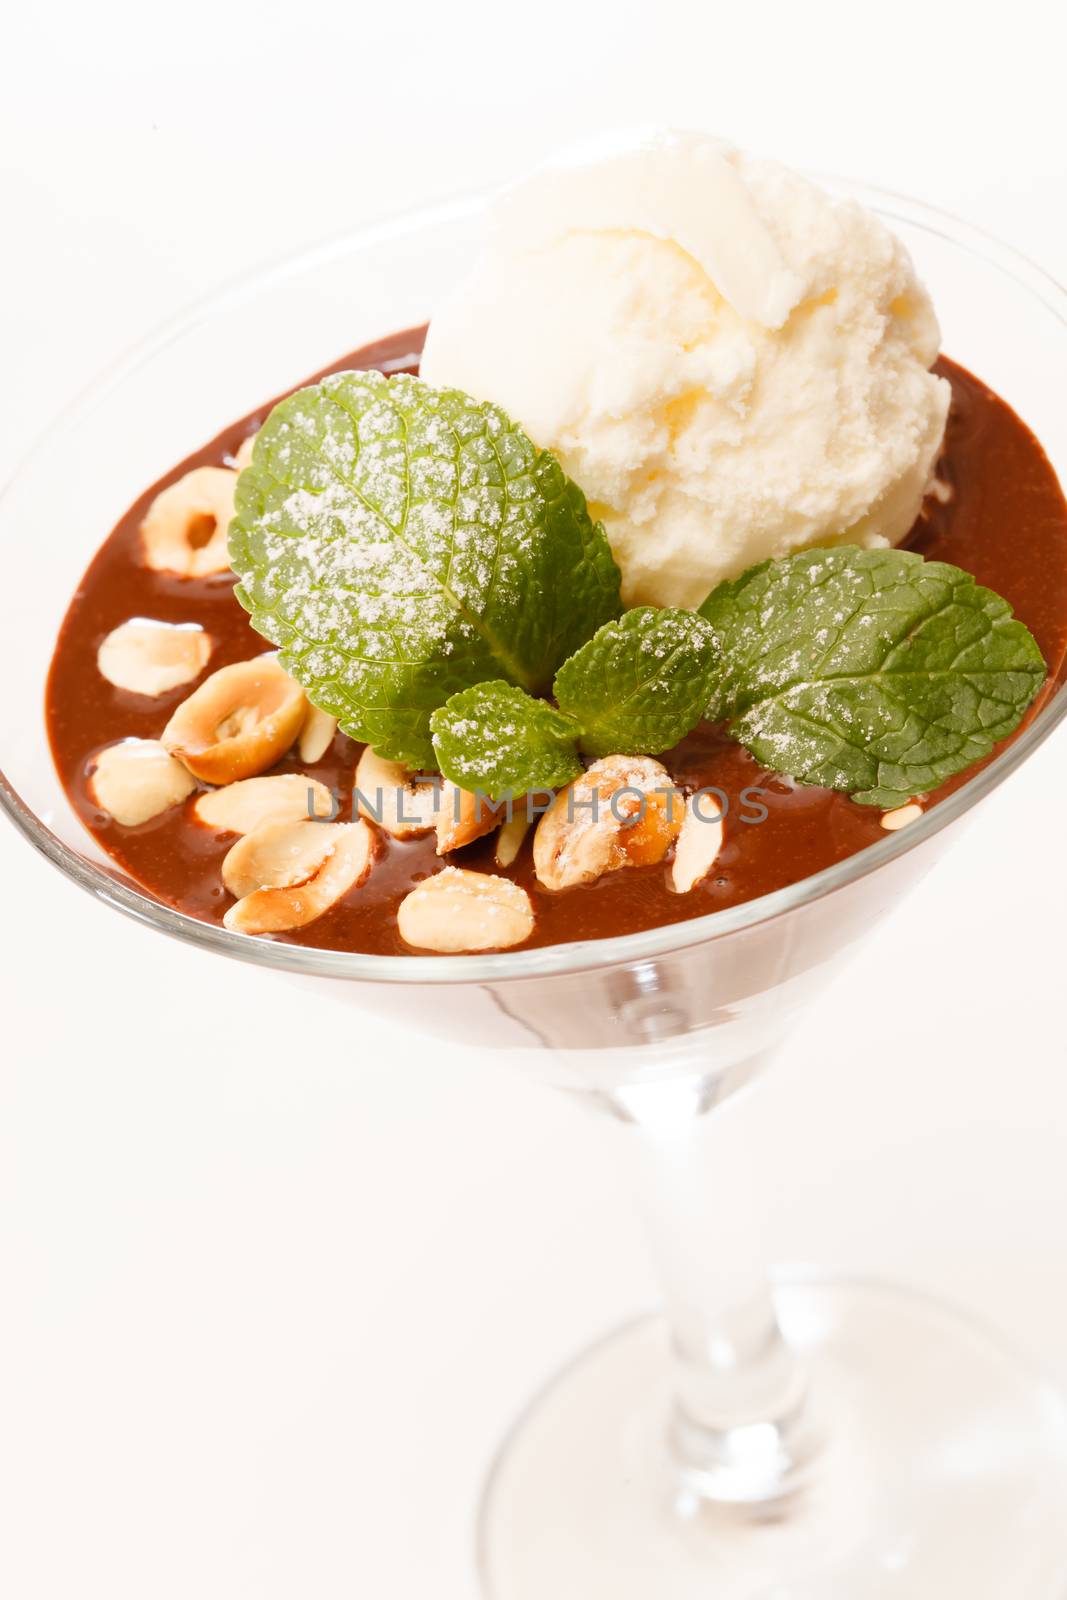 chocolate dessert with ice cream by shebeko